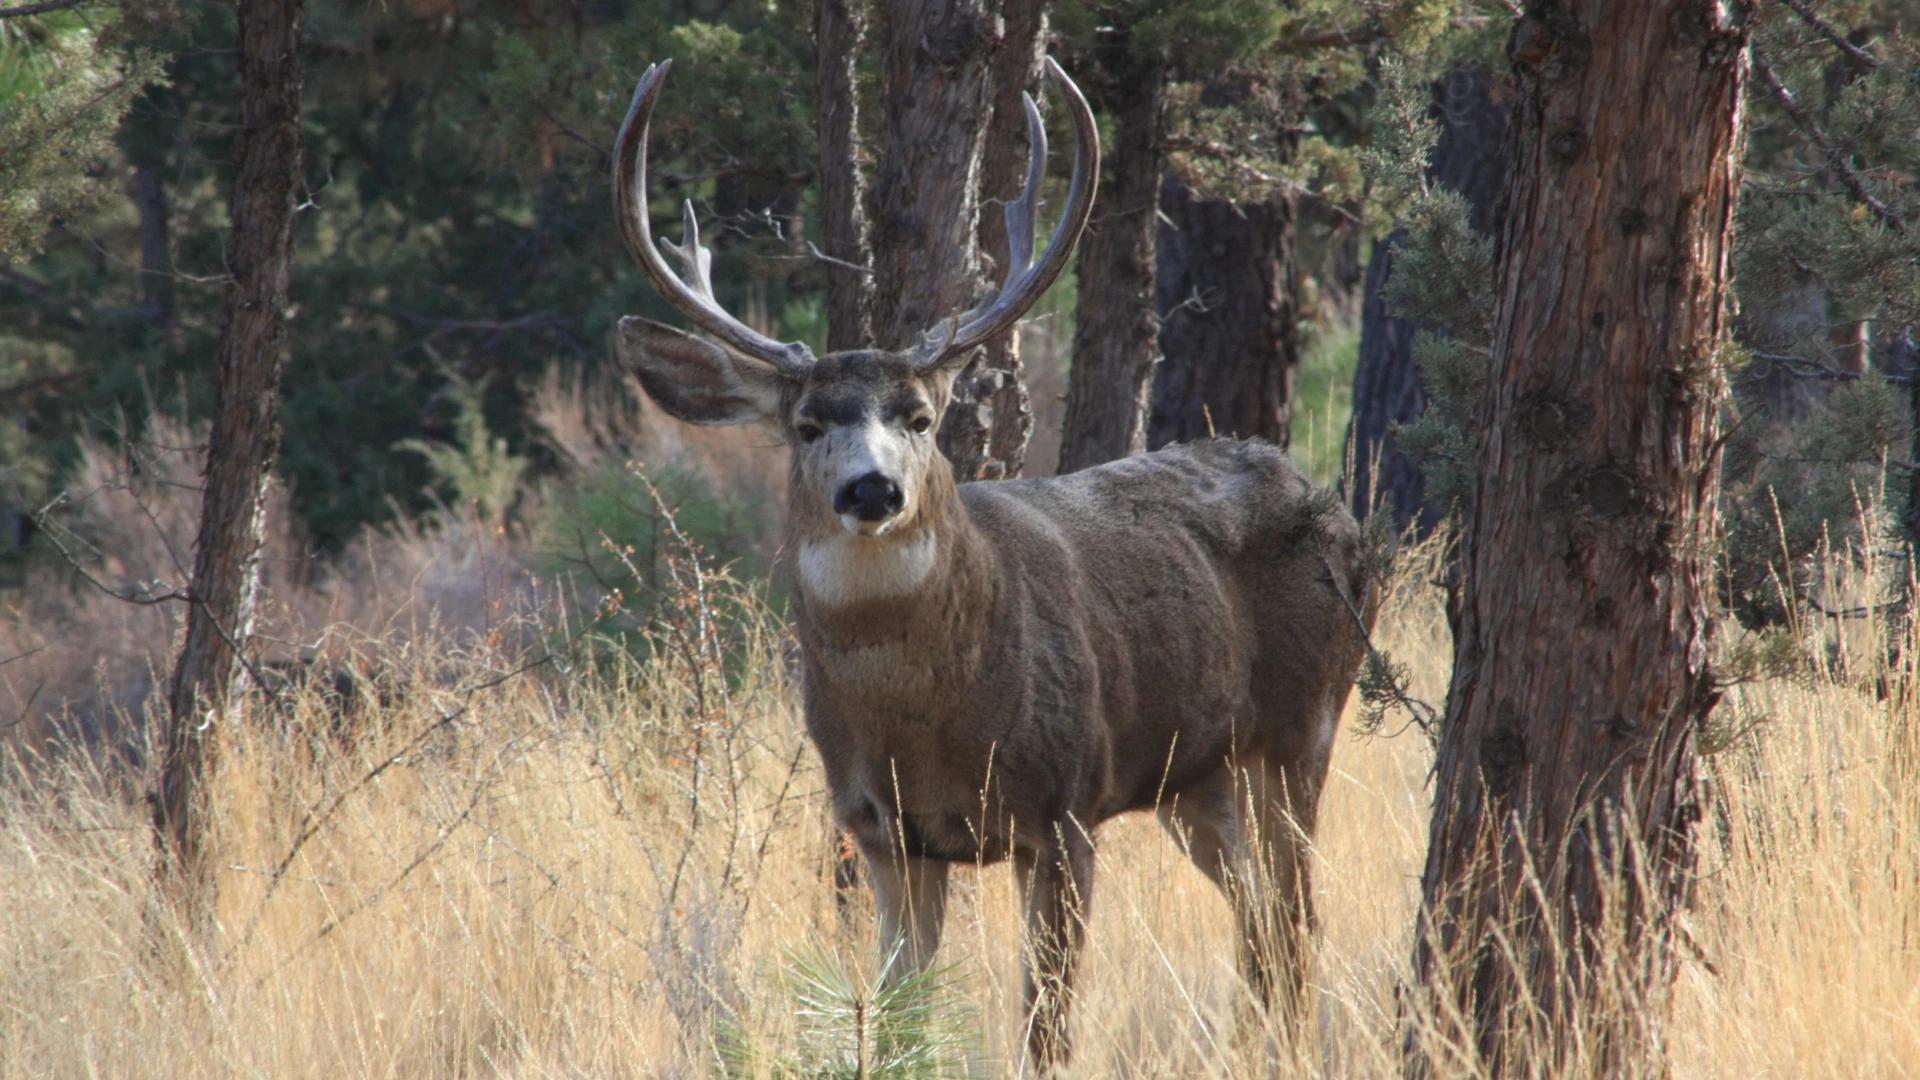 Arizona now offers an online course for a lifetime Hunter Education bonus point to be used in your hunting applications